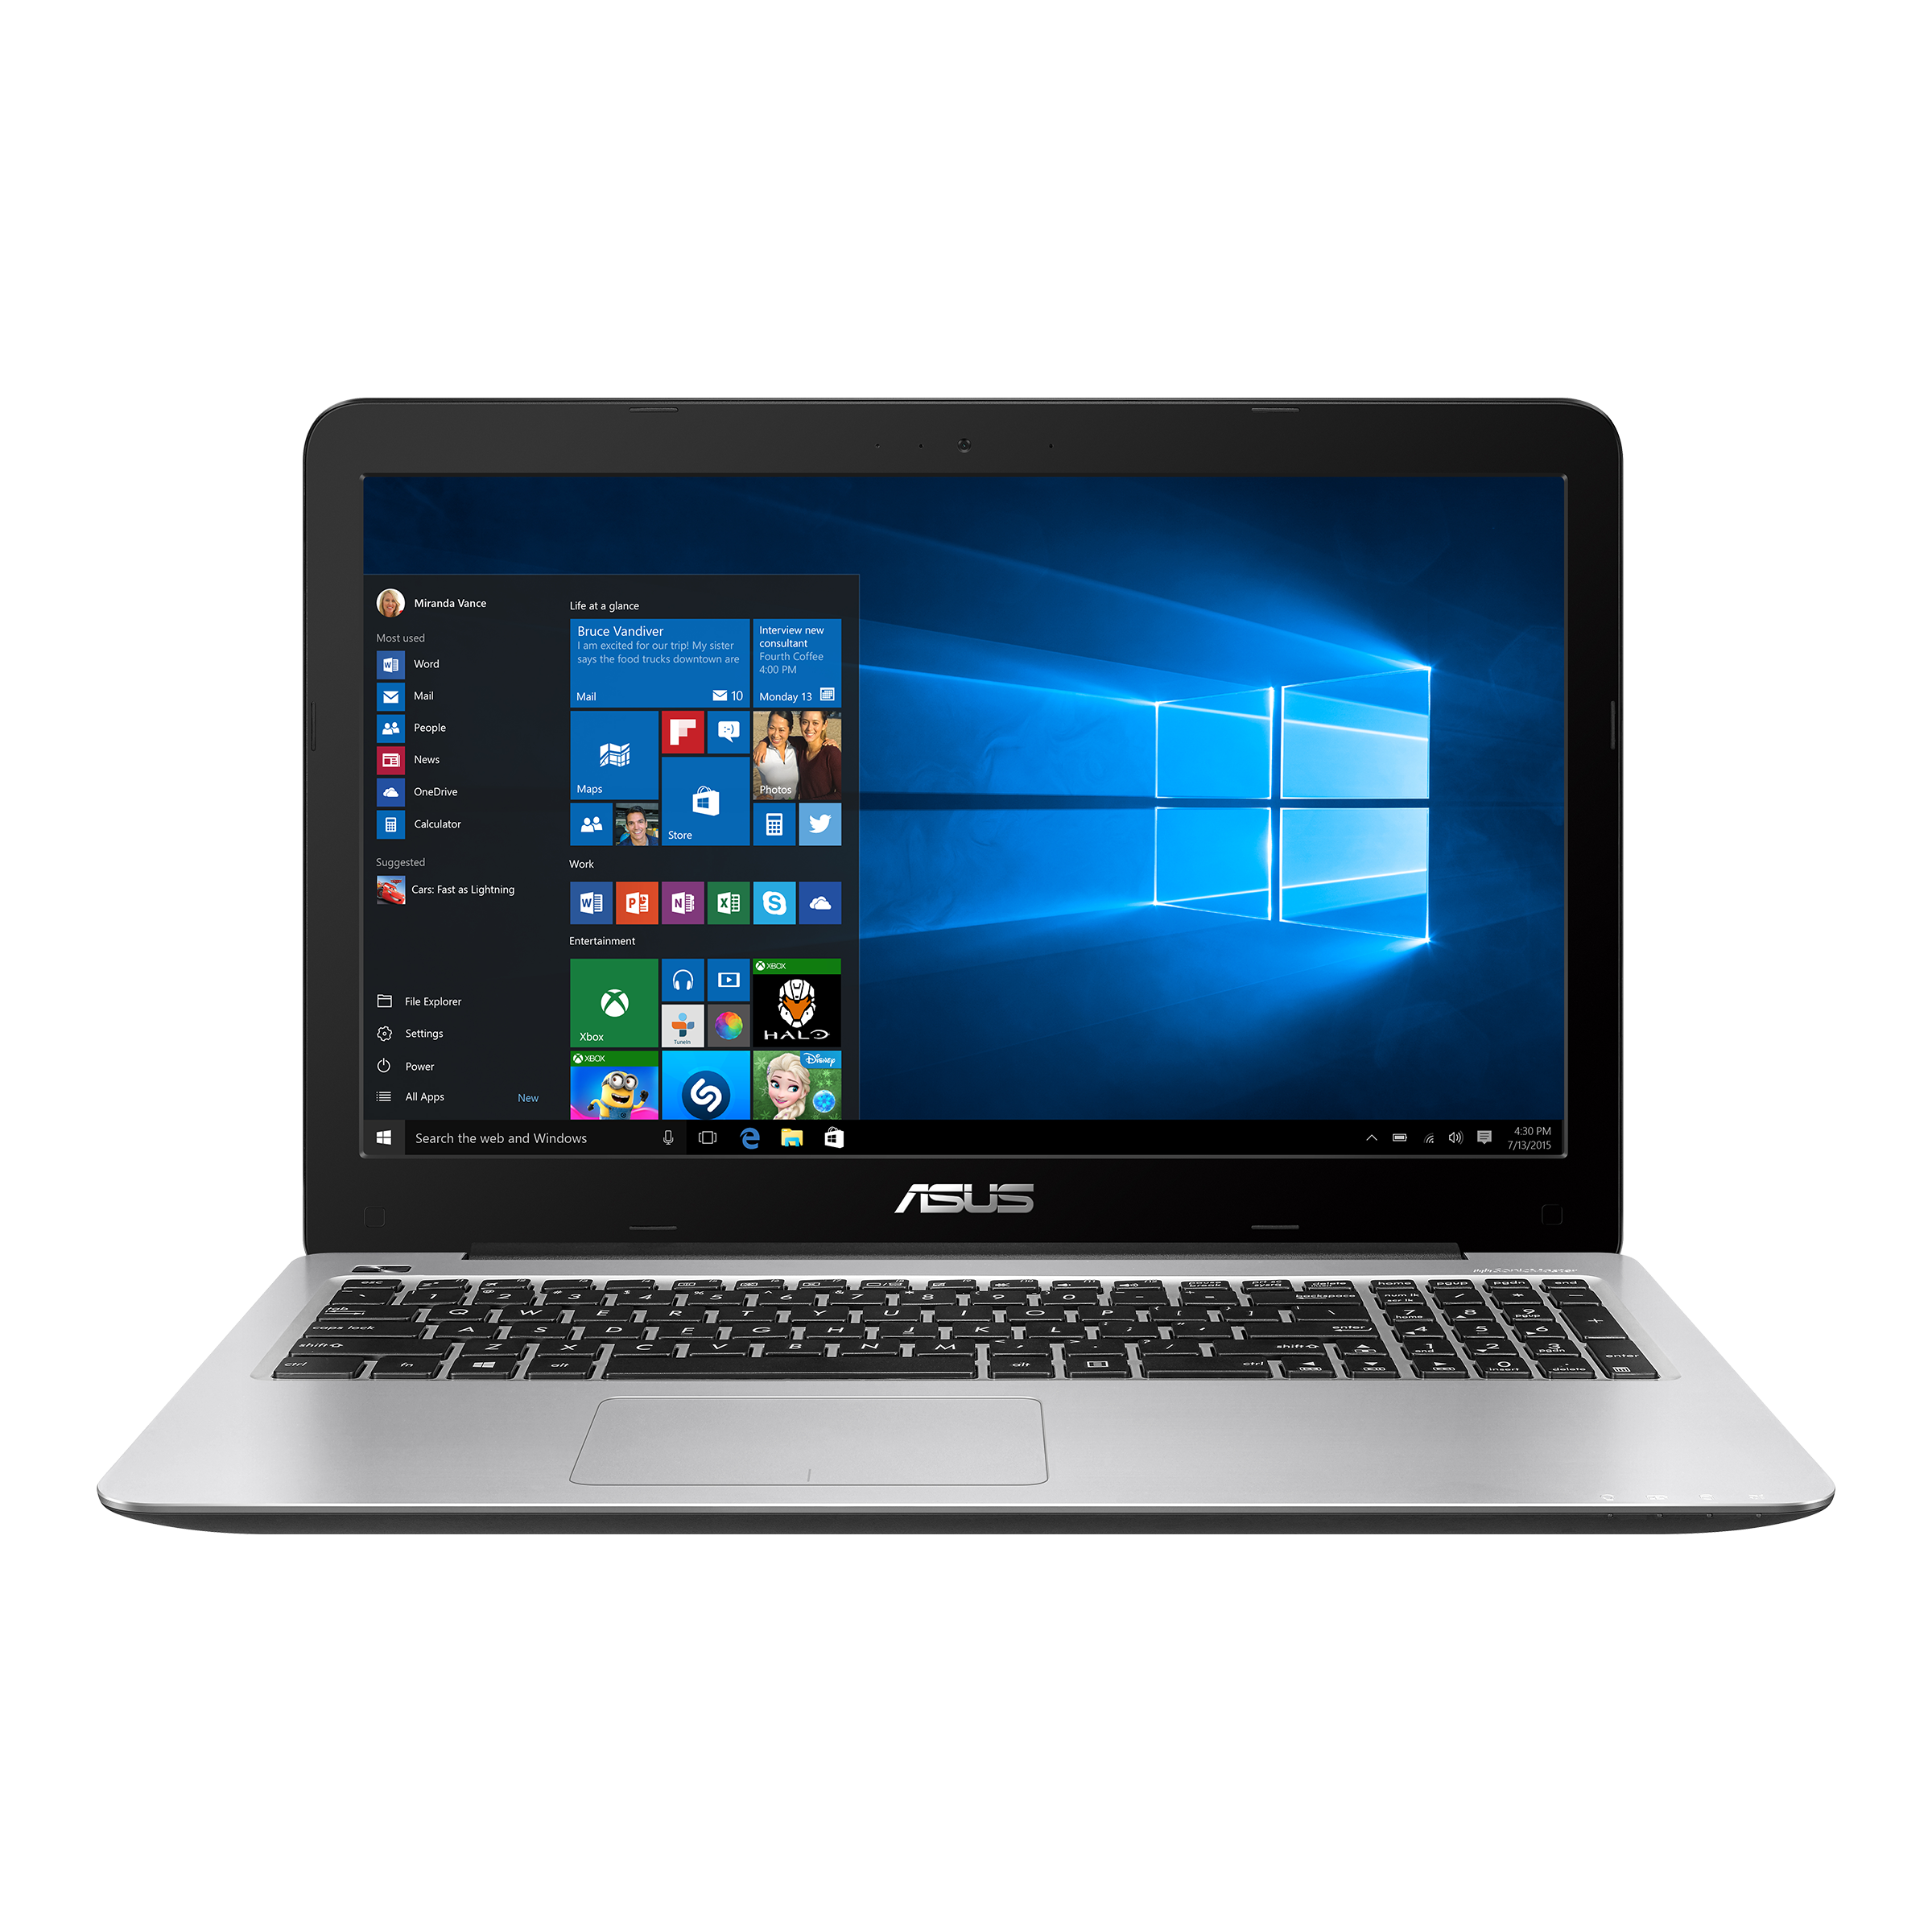 ASUS X556｜Laptops For Home｜ASUS Global